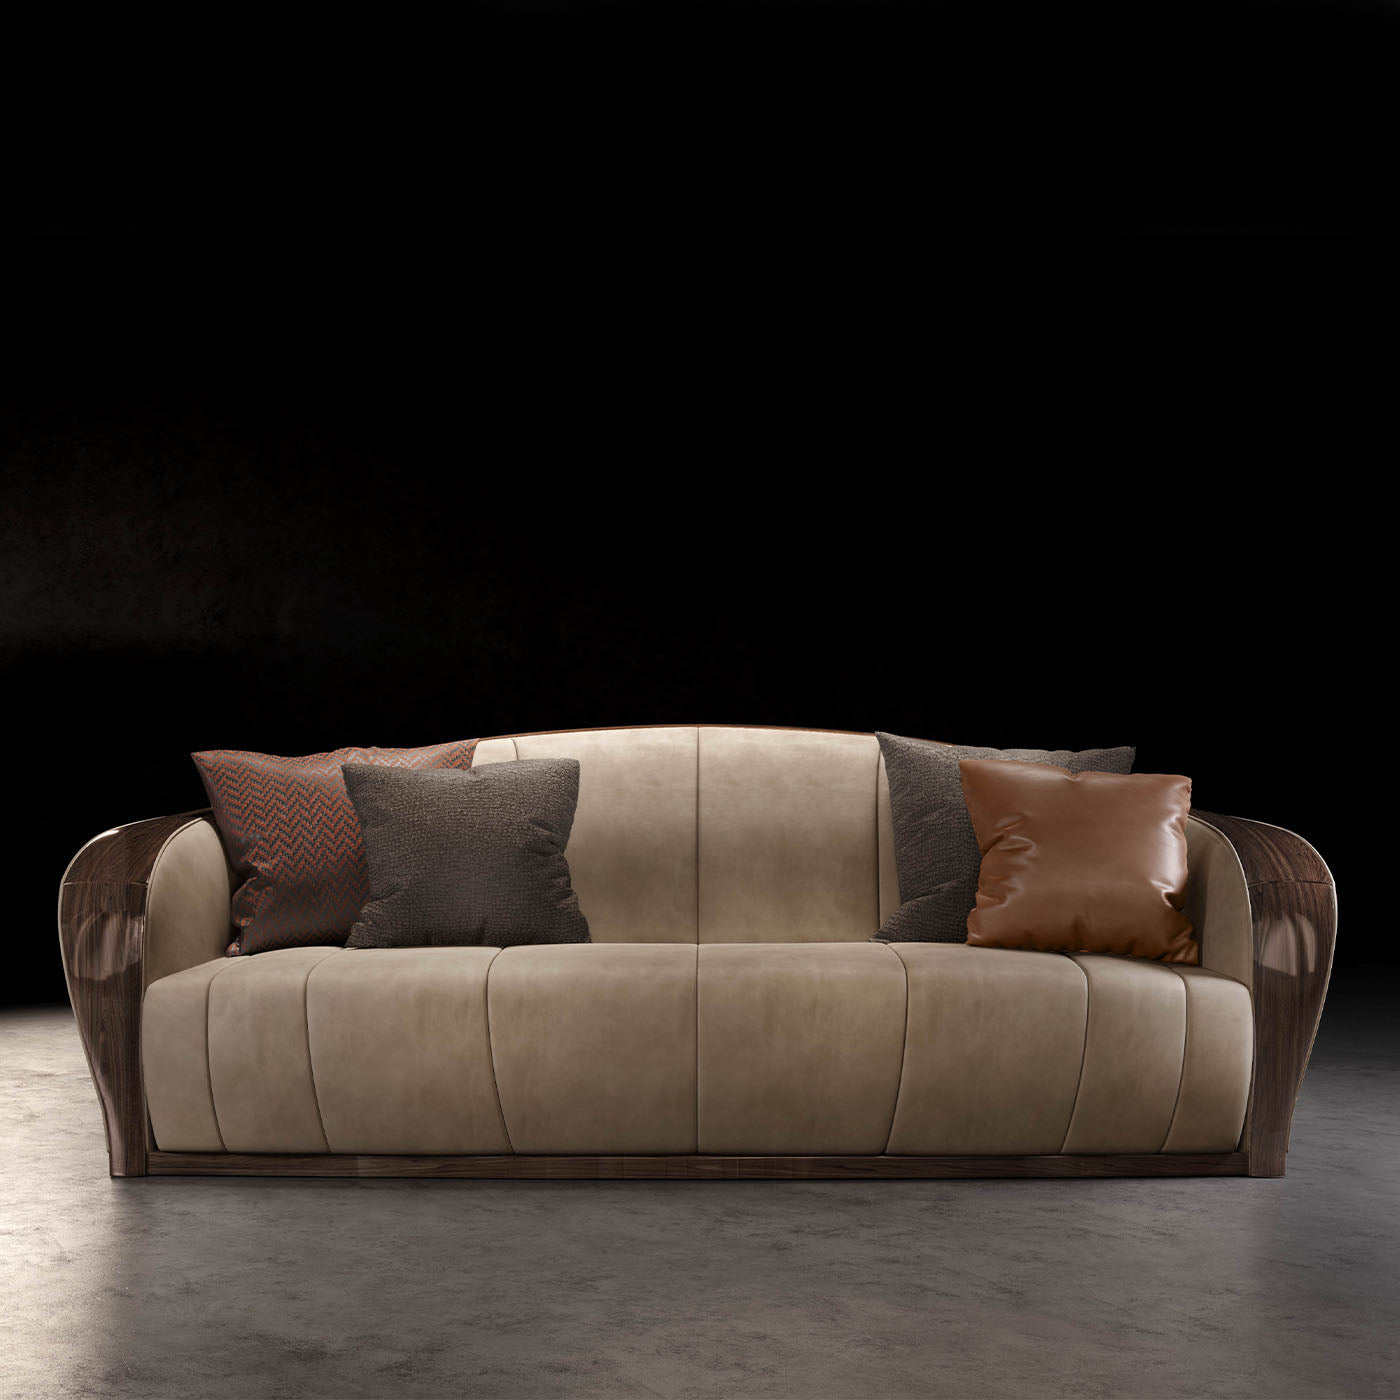  Castagno Channeled Brown-Leather Sofa - Alternative view 4